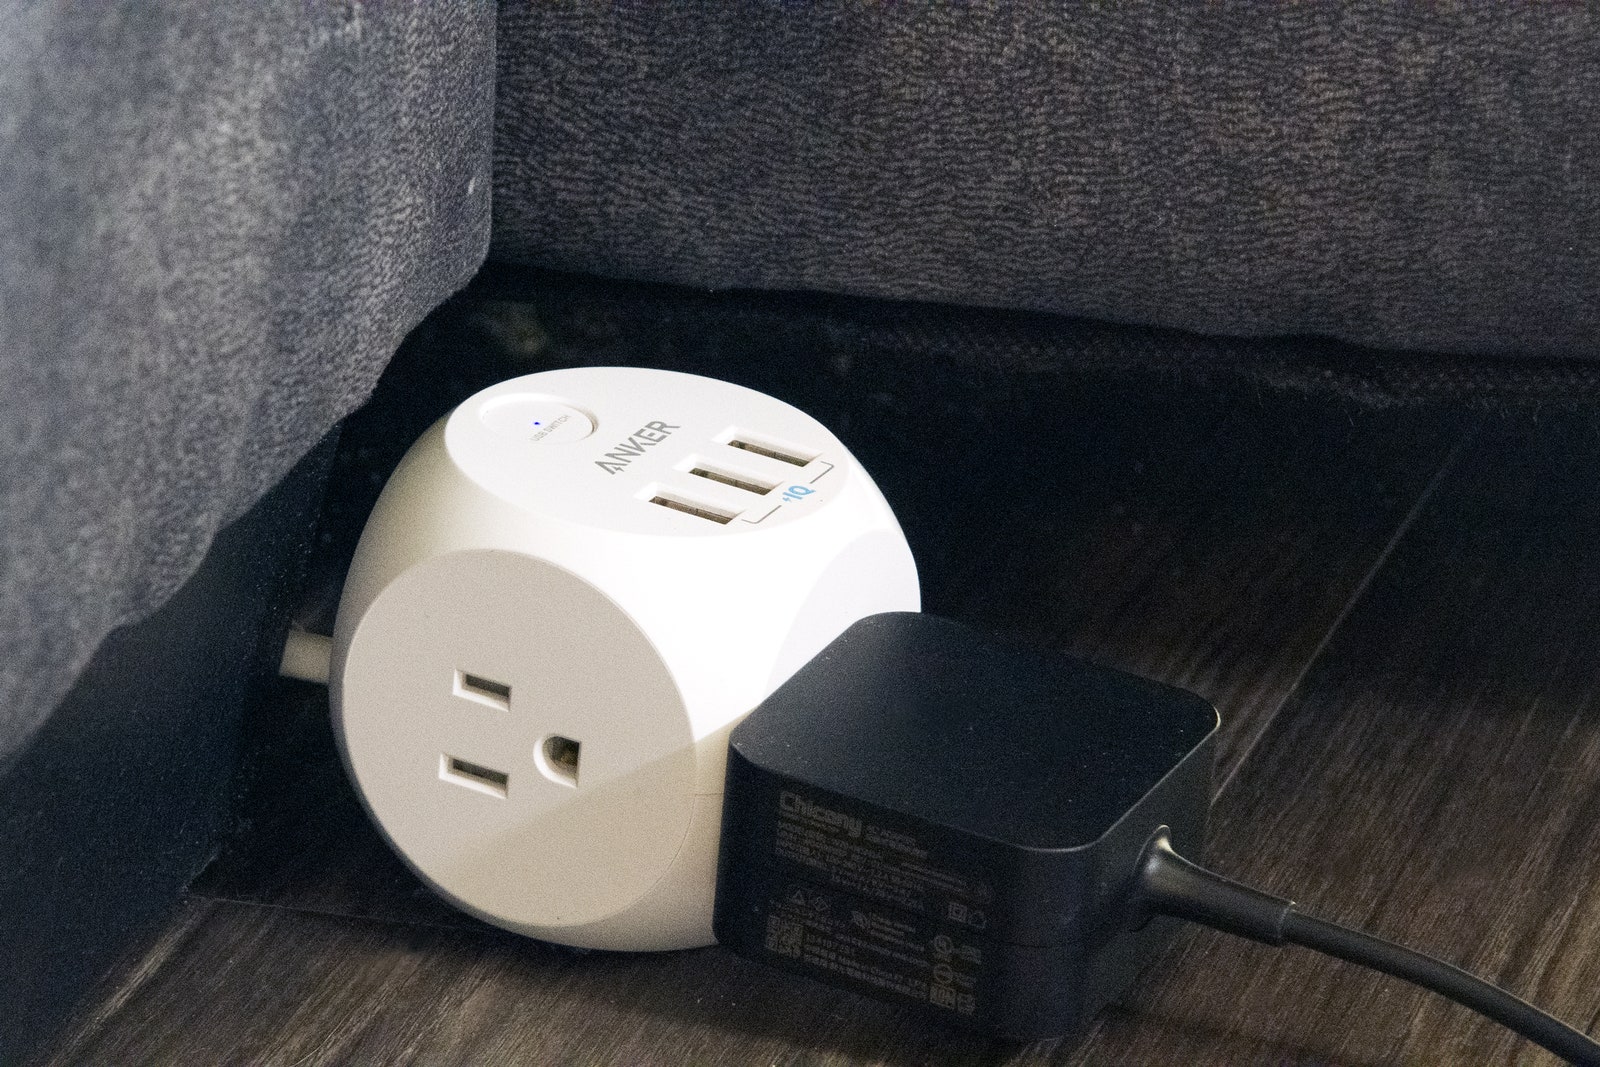 Anker Power Cube plugged in near couch